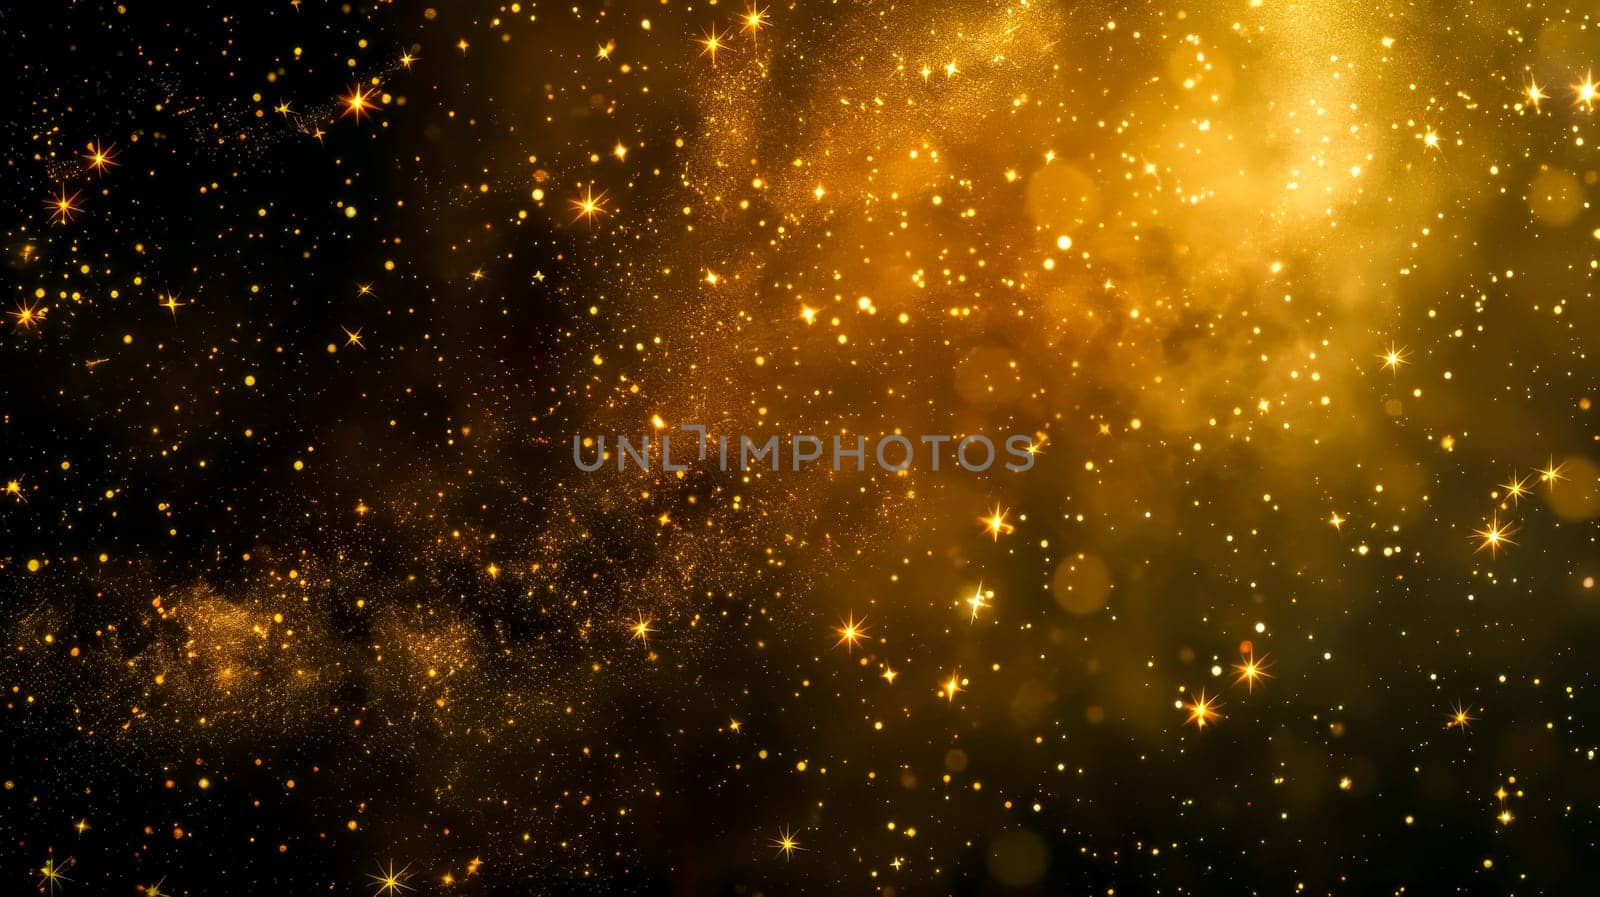 Abstract golden dust particles with sparkling bokeh effect, perfect for backgrounds by Edophoto